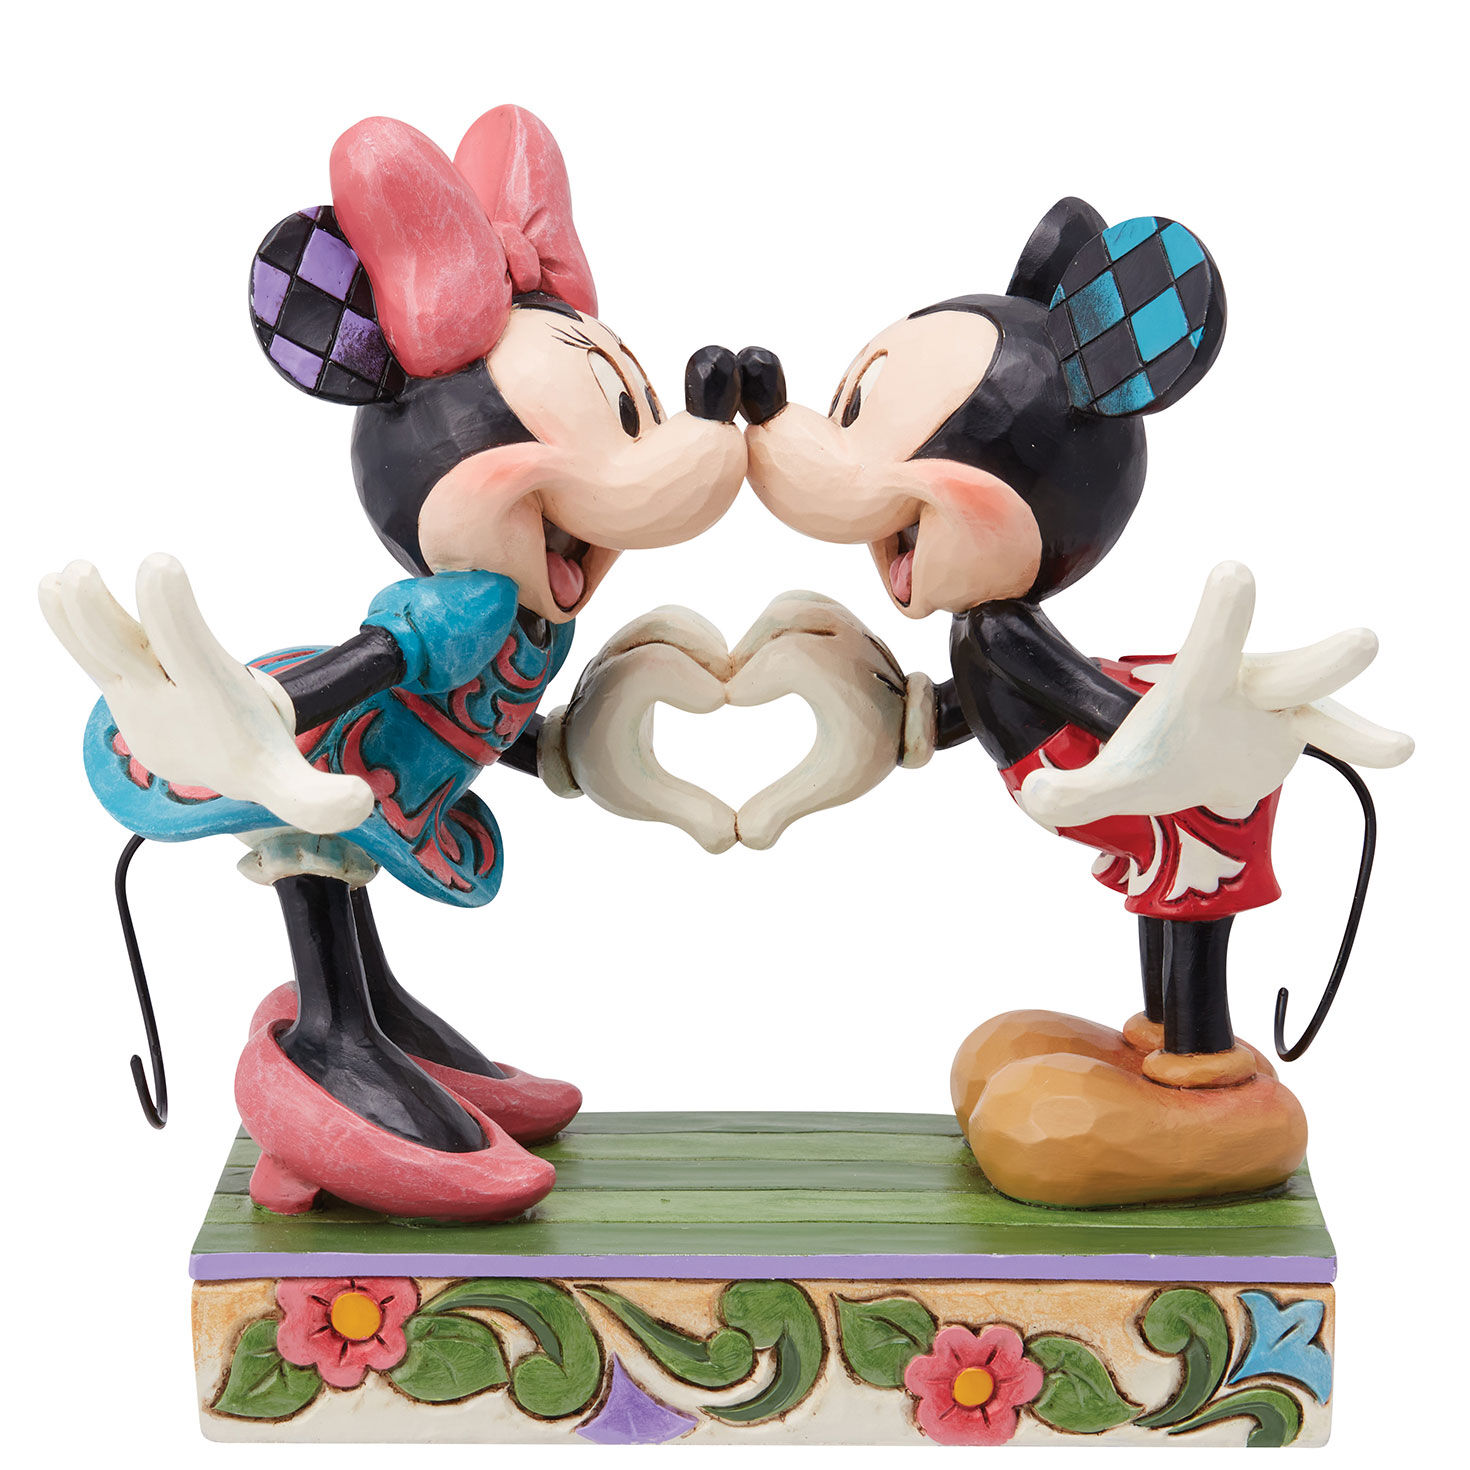 Jim Shore Disney Mickey and Minnie Making Heart Hands Figurine, 4.5" for only USD 89.99 | Hallmark